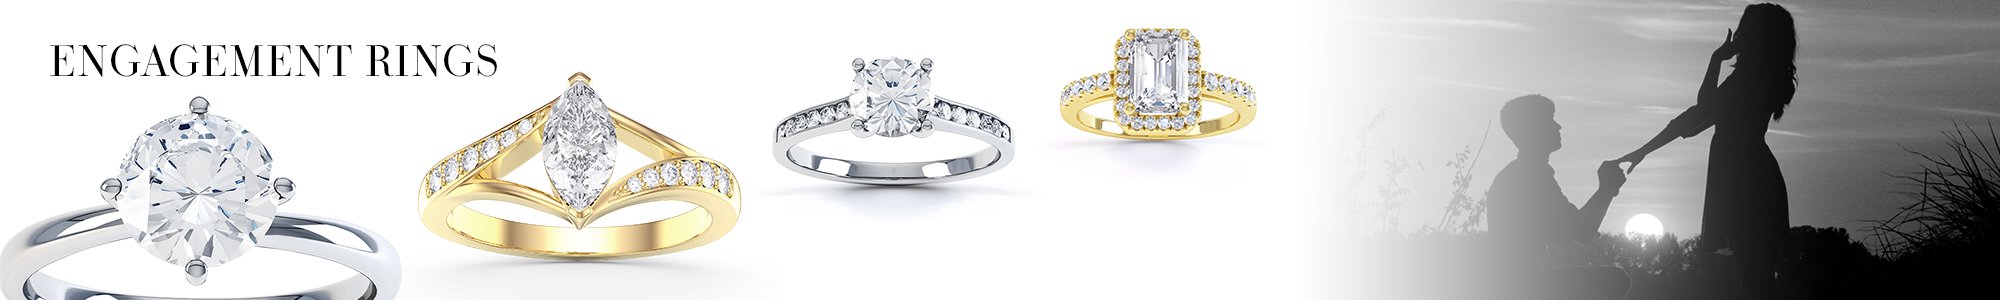 Engagement Rings - From White Sapphire set in Silver to Diamonds set in 18ct Gold or Platinum.